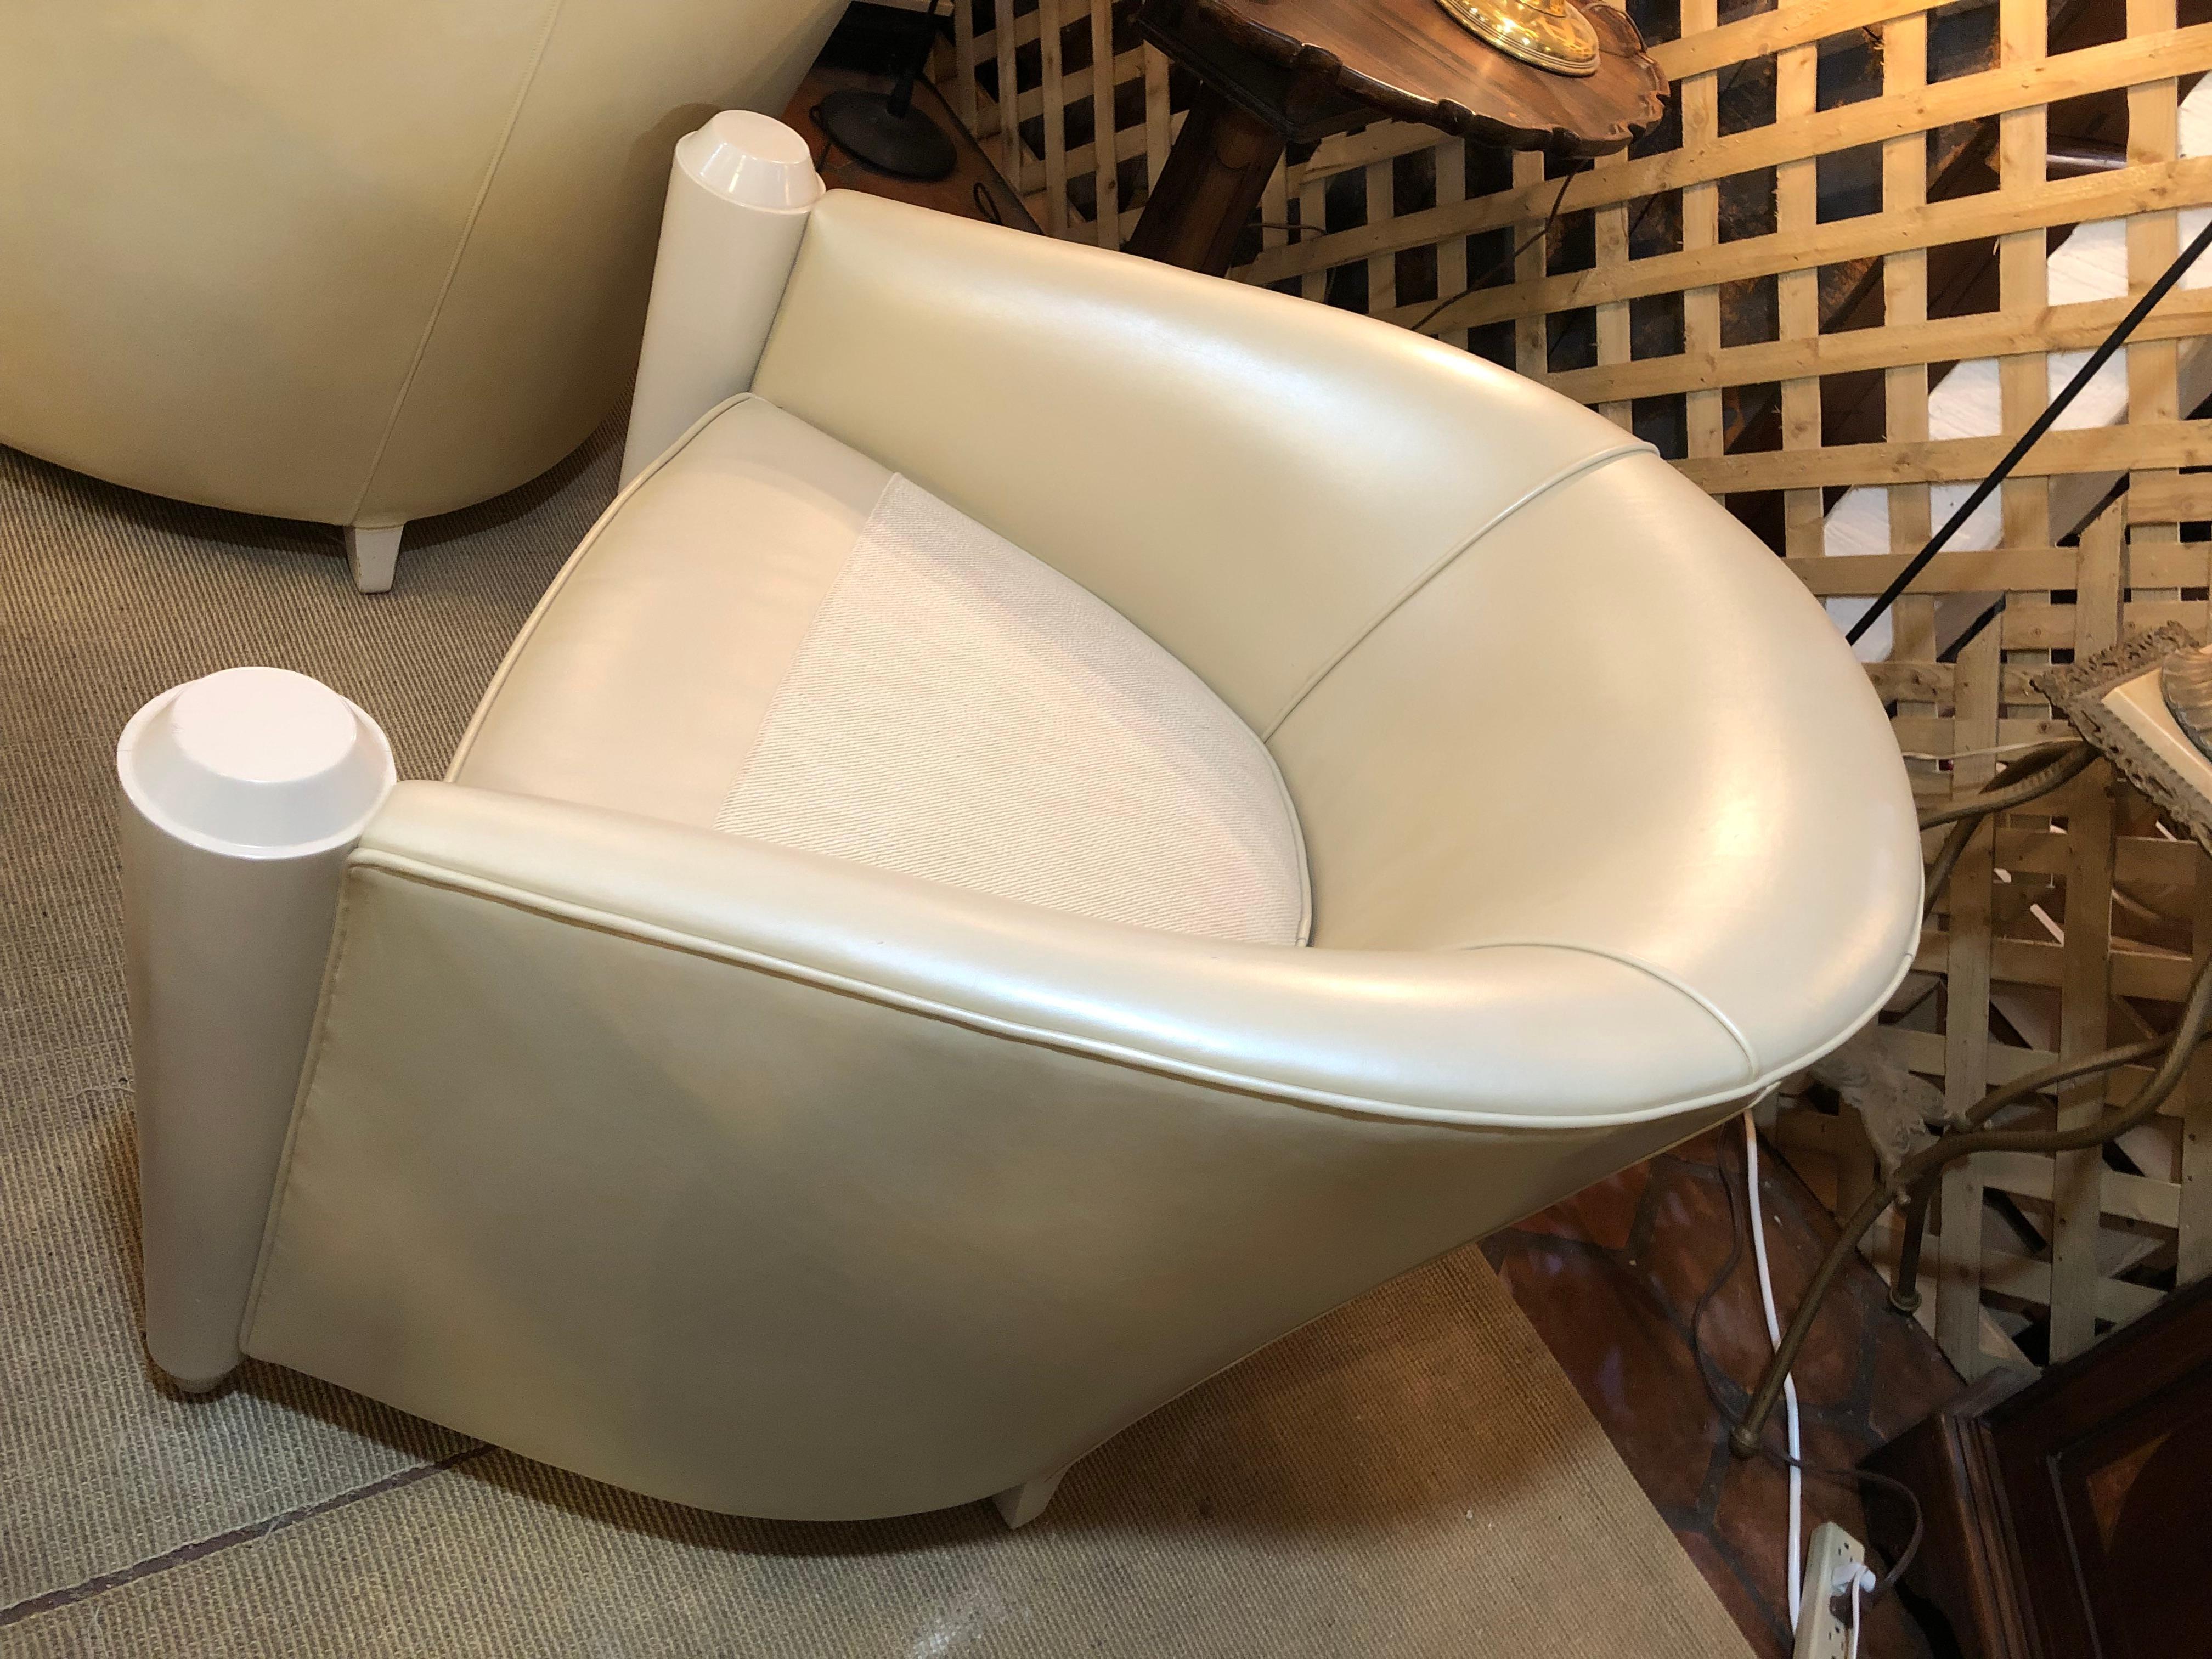 Glamorous & luxurious custom made cream leather barrel shaped club chairs having fascinating shiny cream laquer cone shaped decoration at the front of each arm and reversible seat cushions.  Local NJ craftsman, full leather hides, not pressed